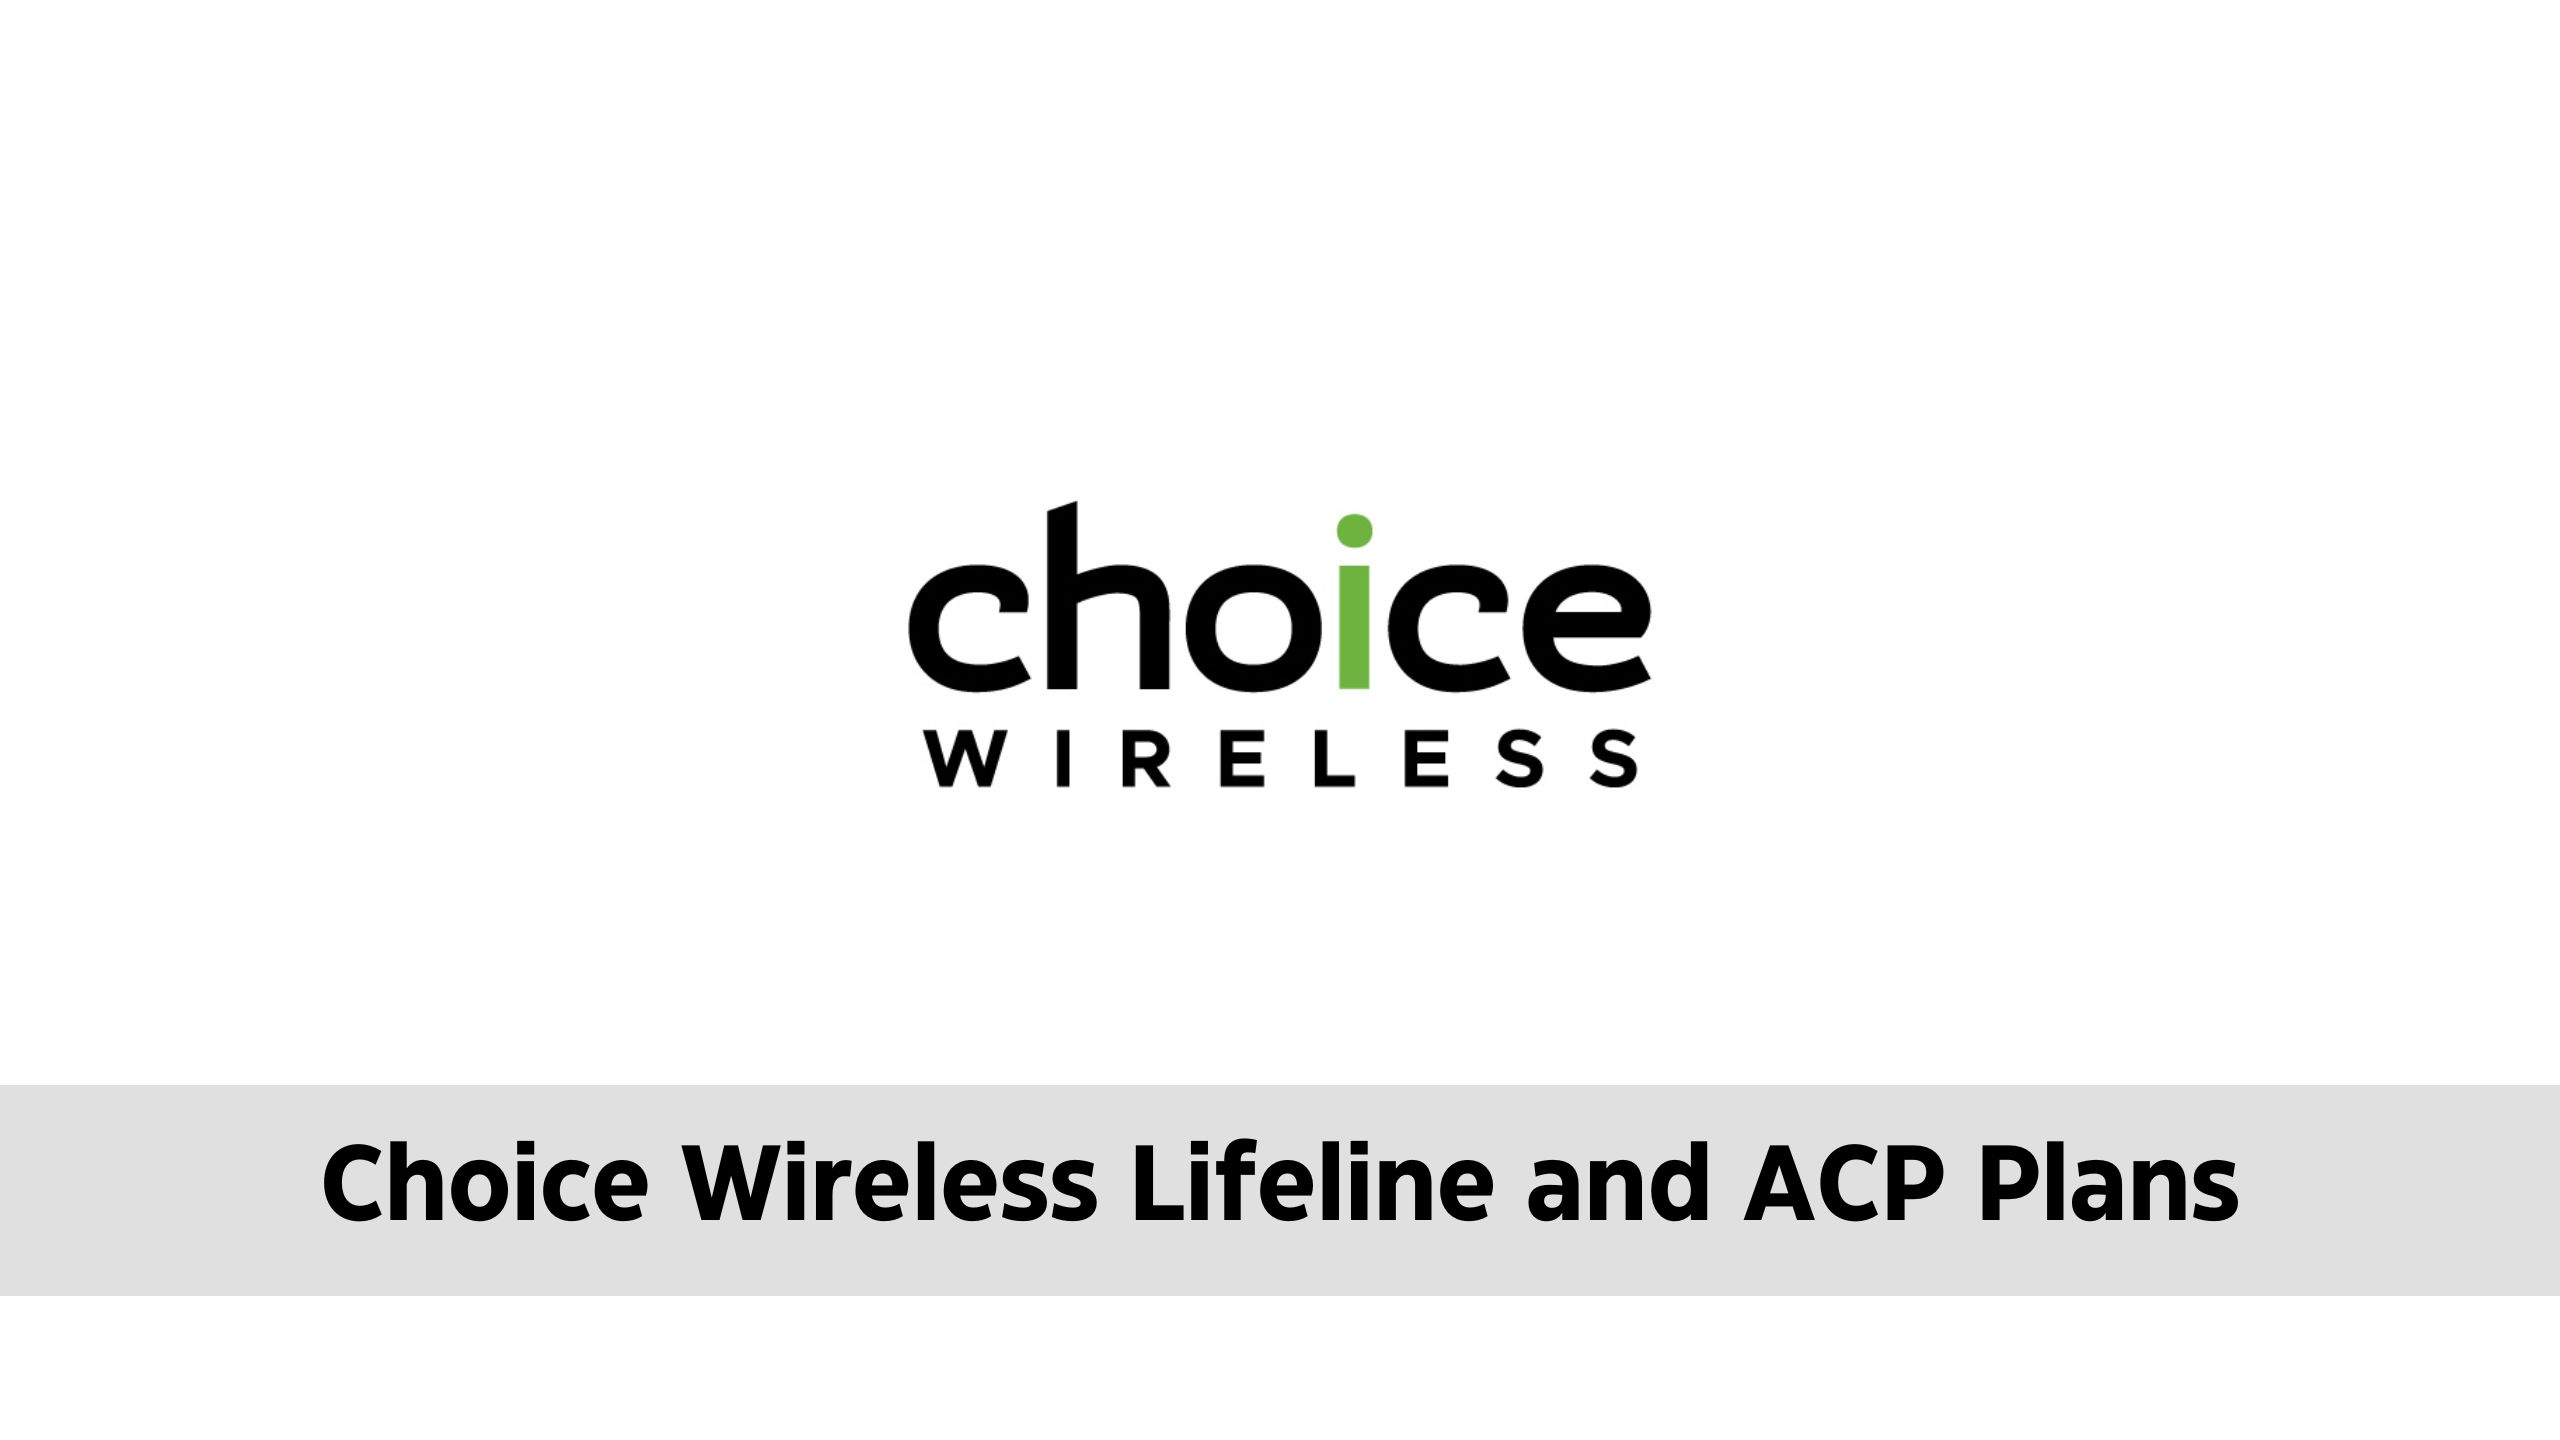 Choice Wireless Lifeline and ACP Plans : Qualification and Application Guide